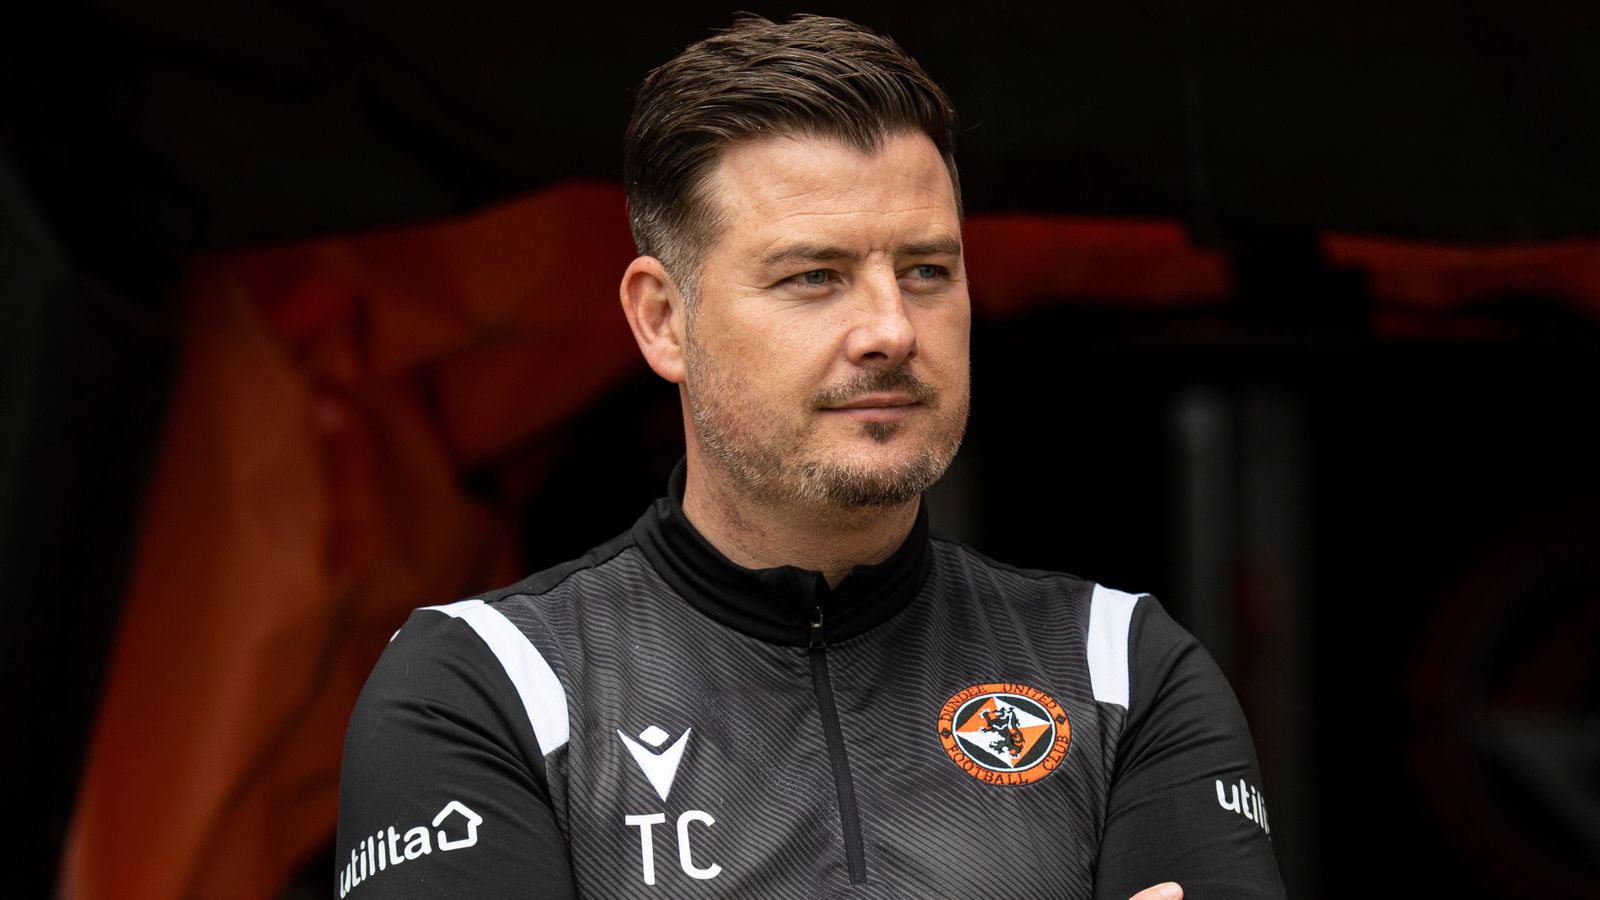 Tam Courts: Dundee United boss given permission to hold Rijeka talks